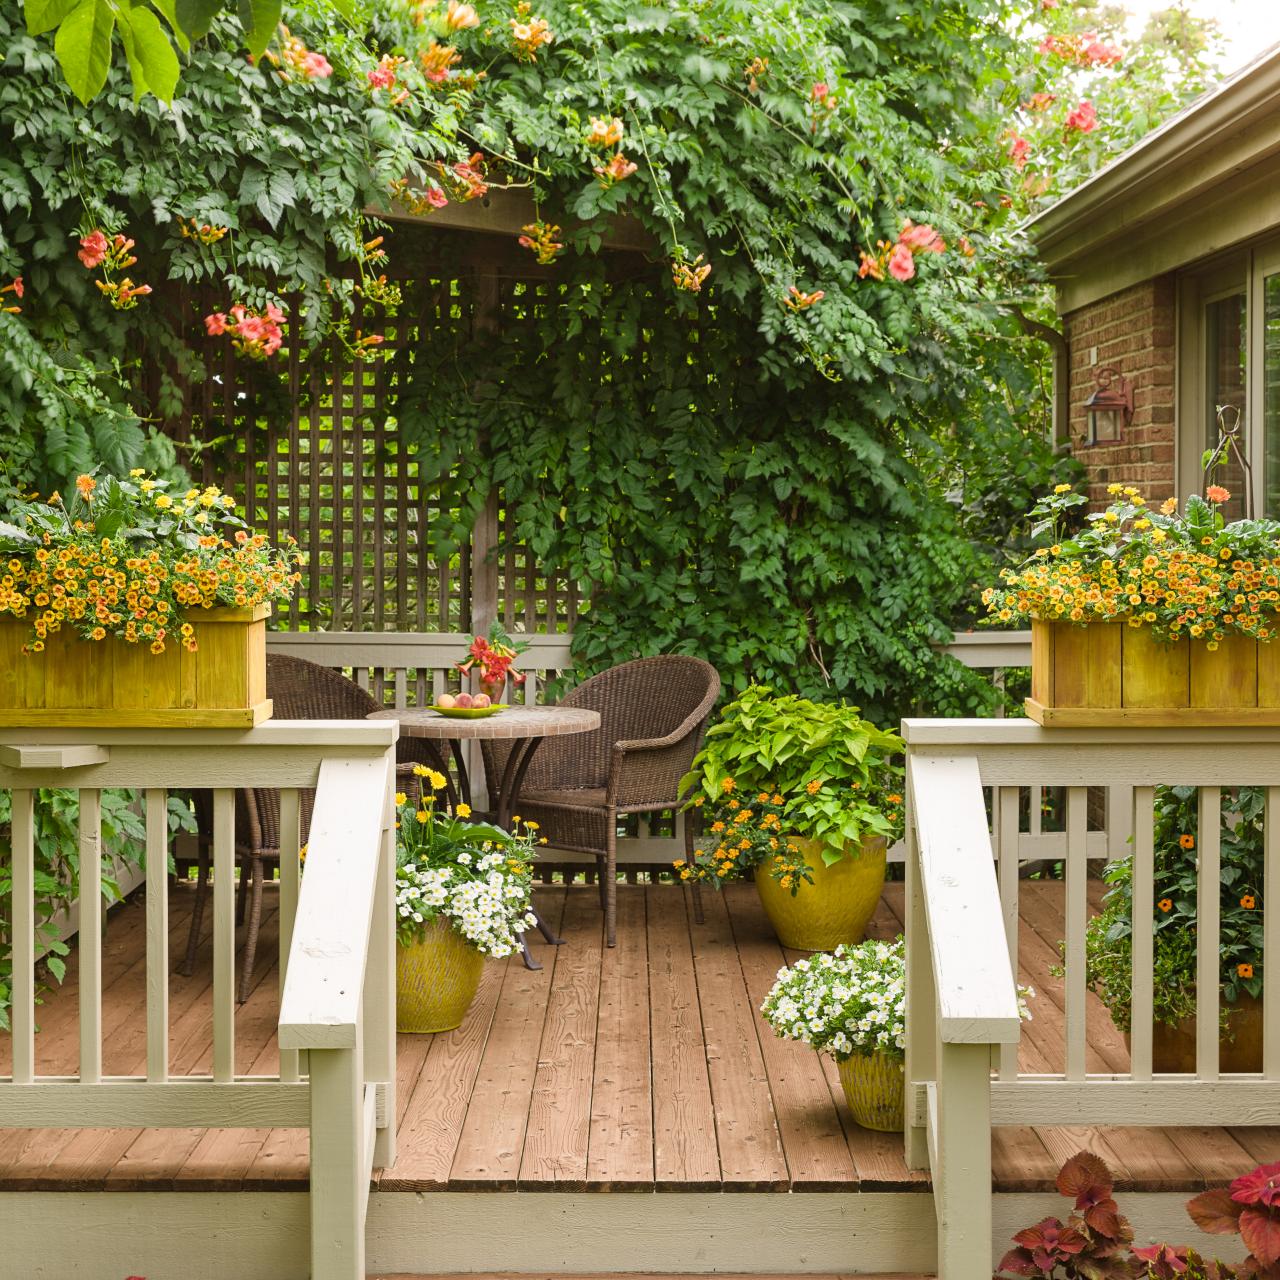 26 Deck Storage Ideas to Organize Your Outdoor Space